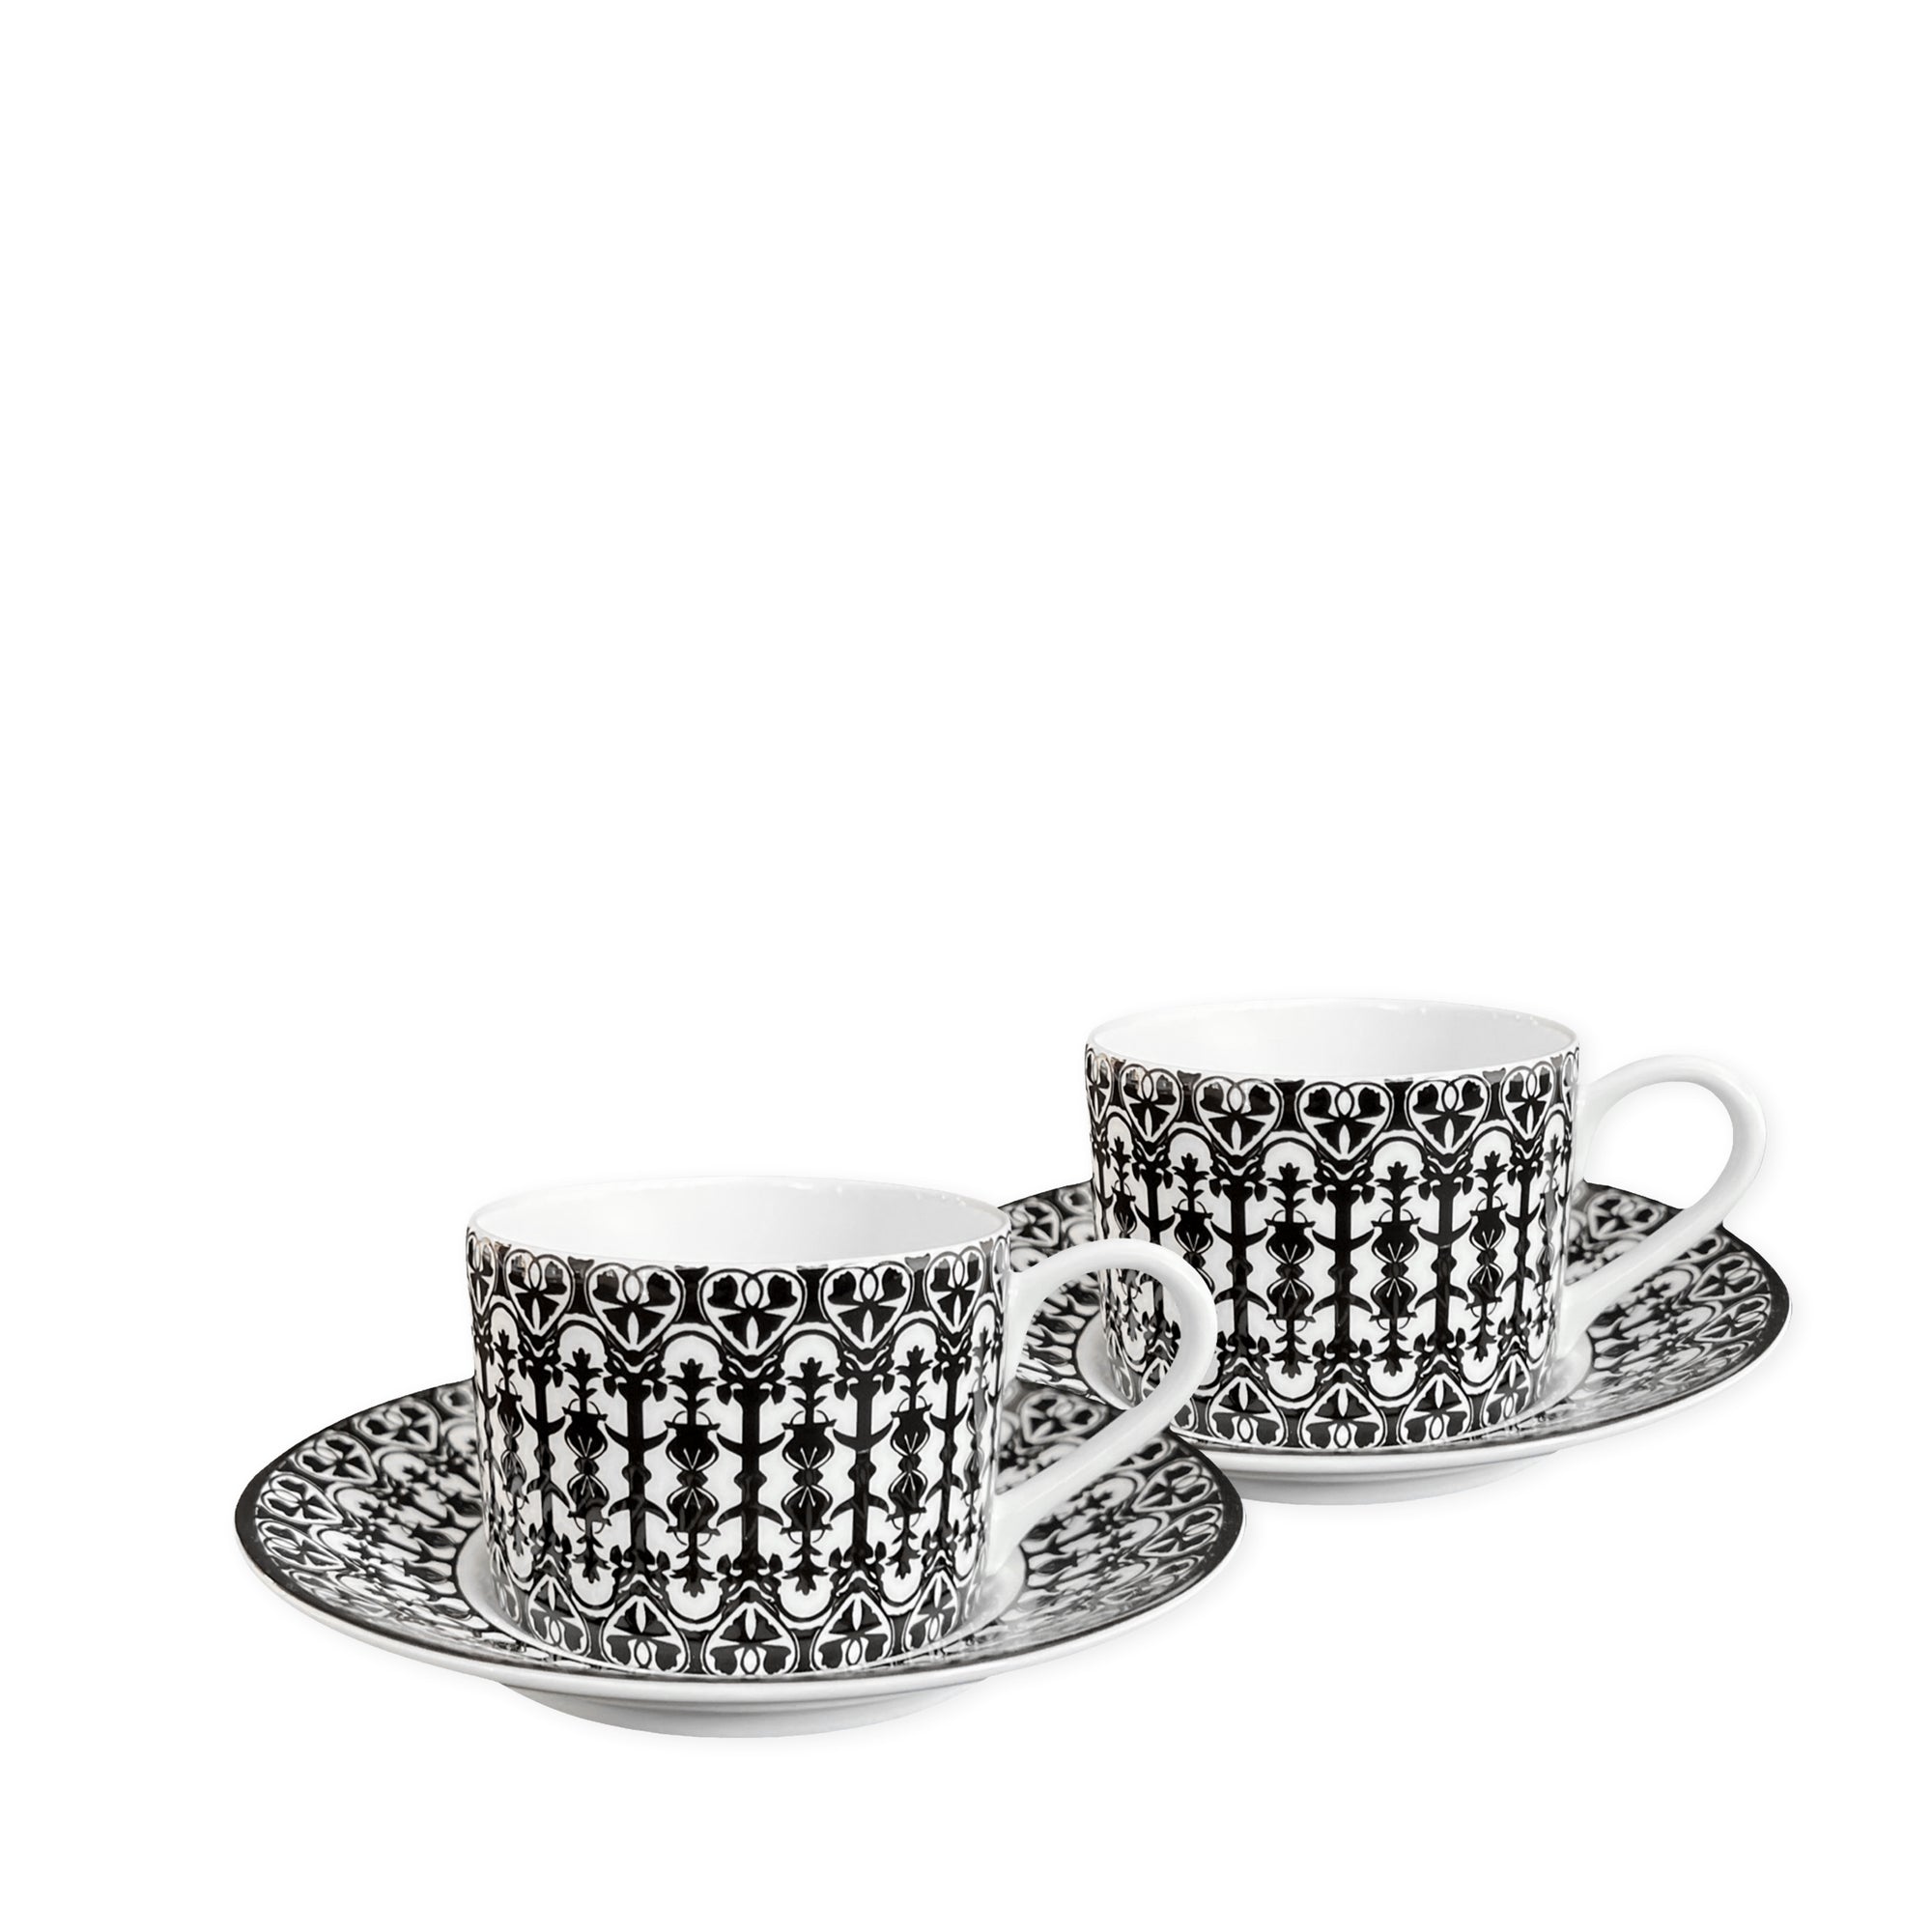 Two white **Casablanca Cups & Saucers, Set of 2** by **Caskata**, featuring black and white intricate patterns, add timeless elegance to any dinnerware collection.